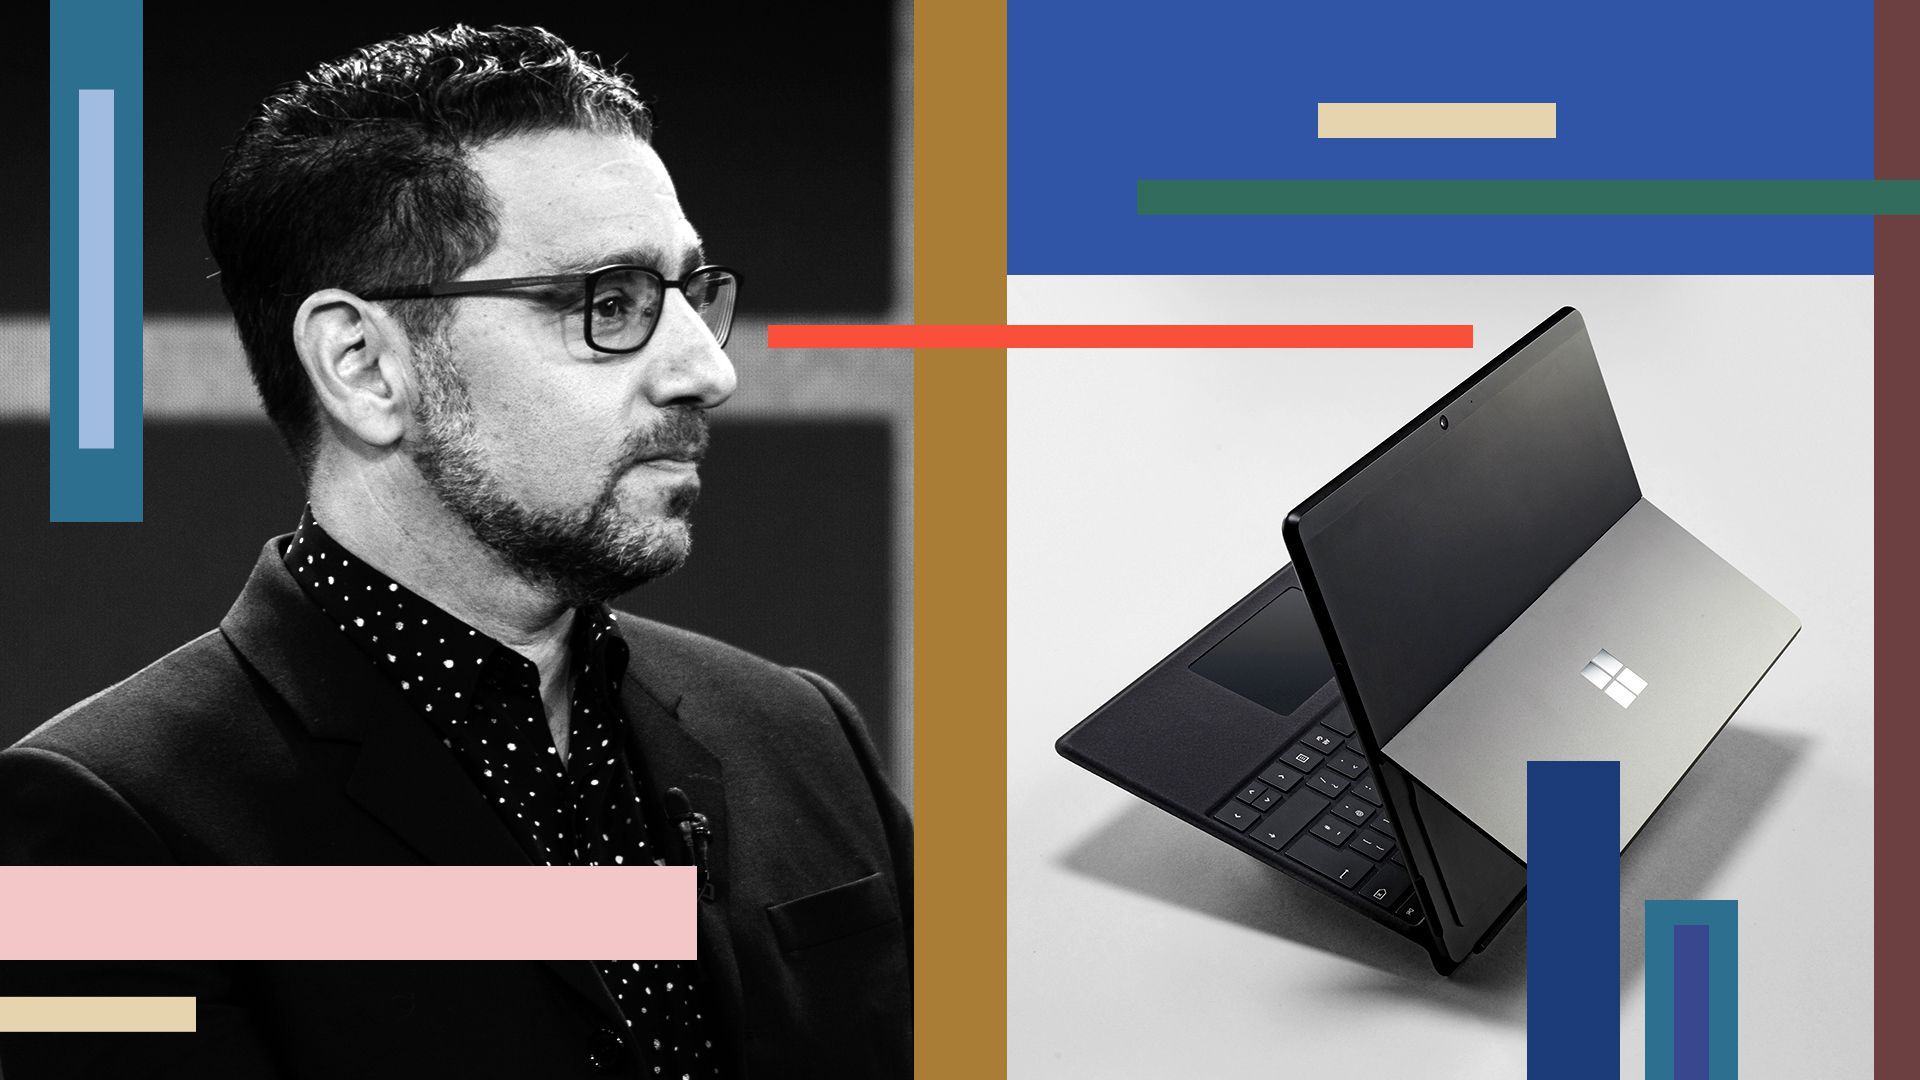 Photo illustration of Microsoft's Panos Panay with a Surface device.